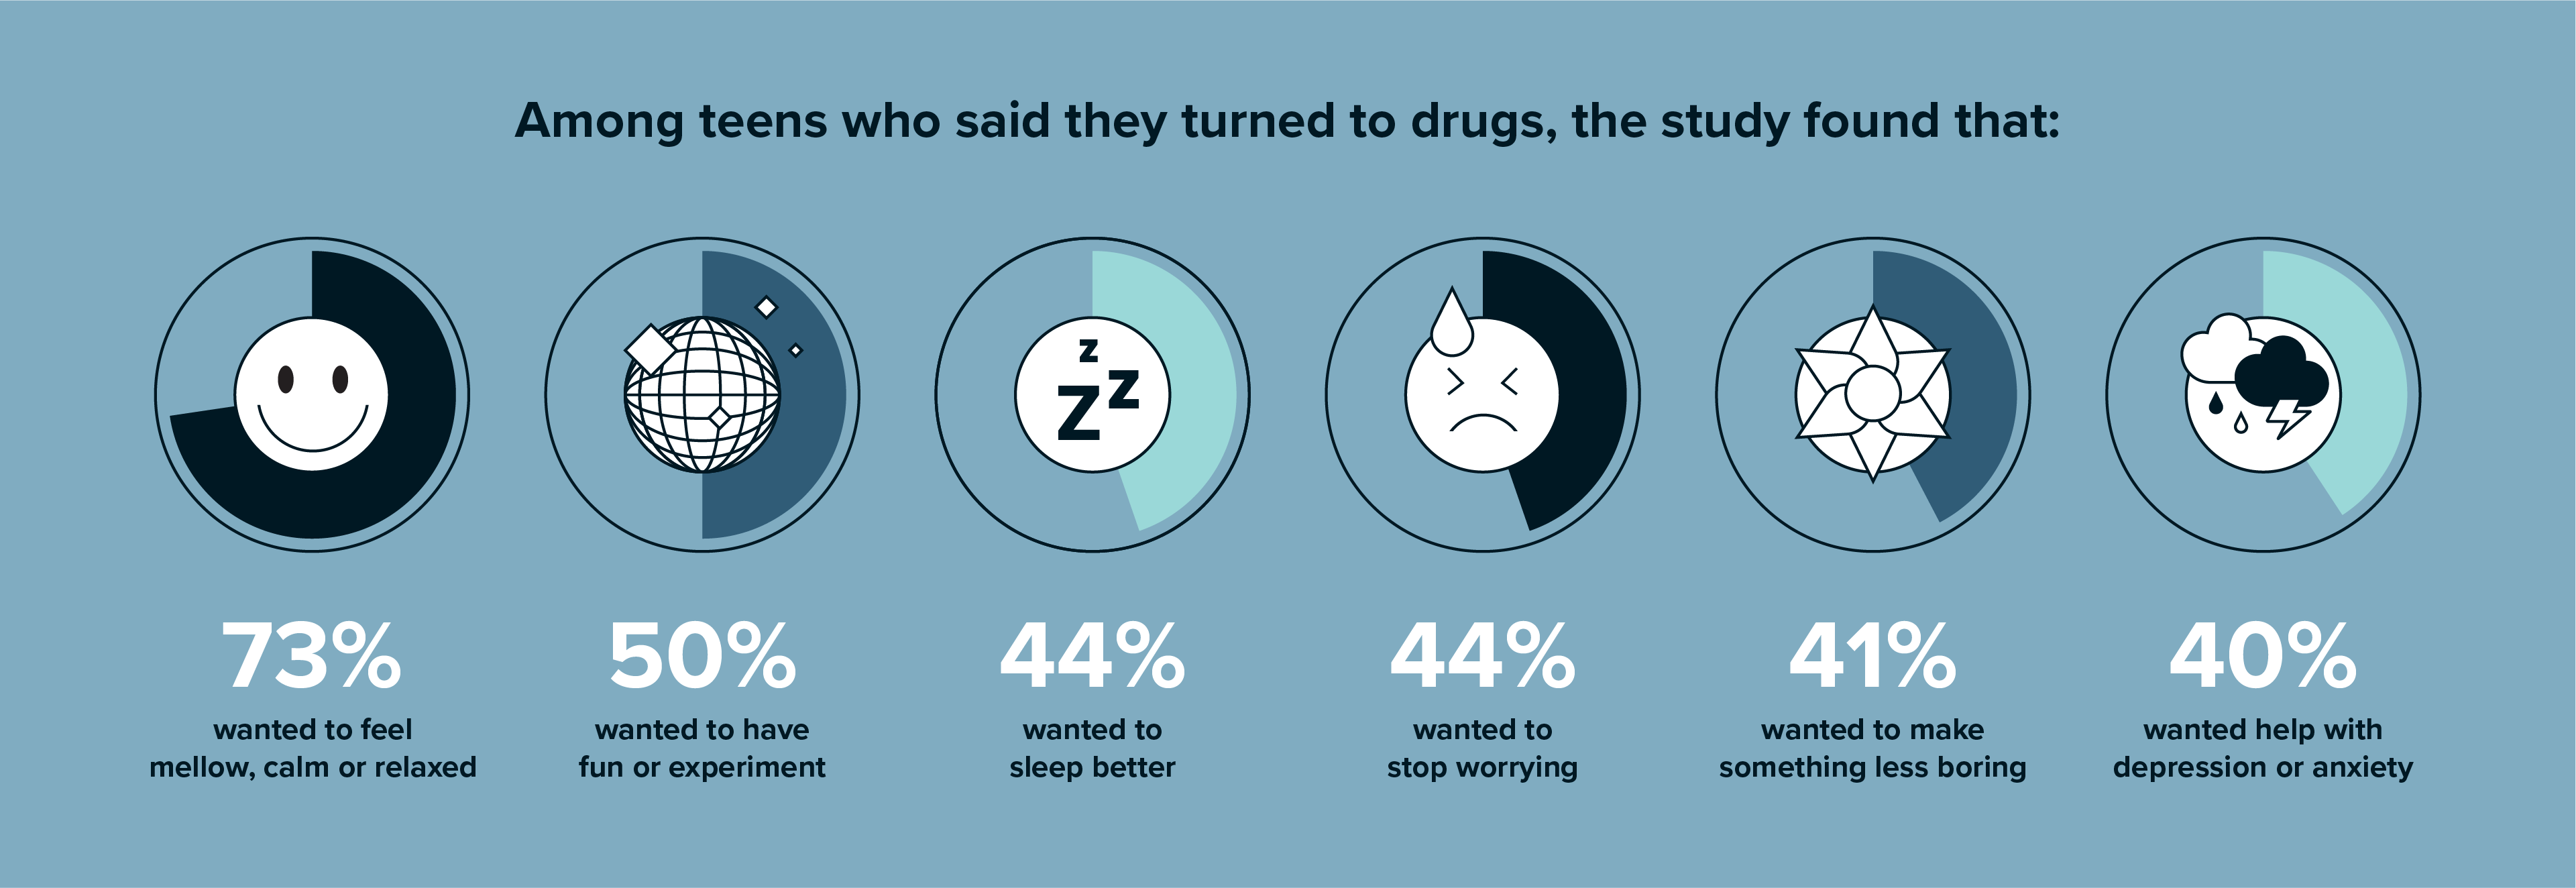 CDC teen substance misuse survey results